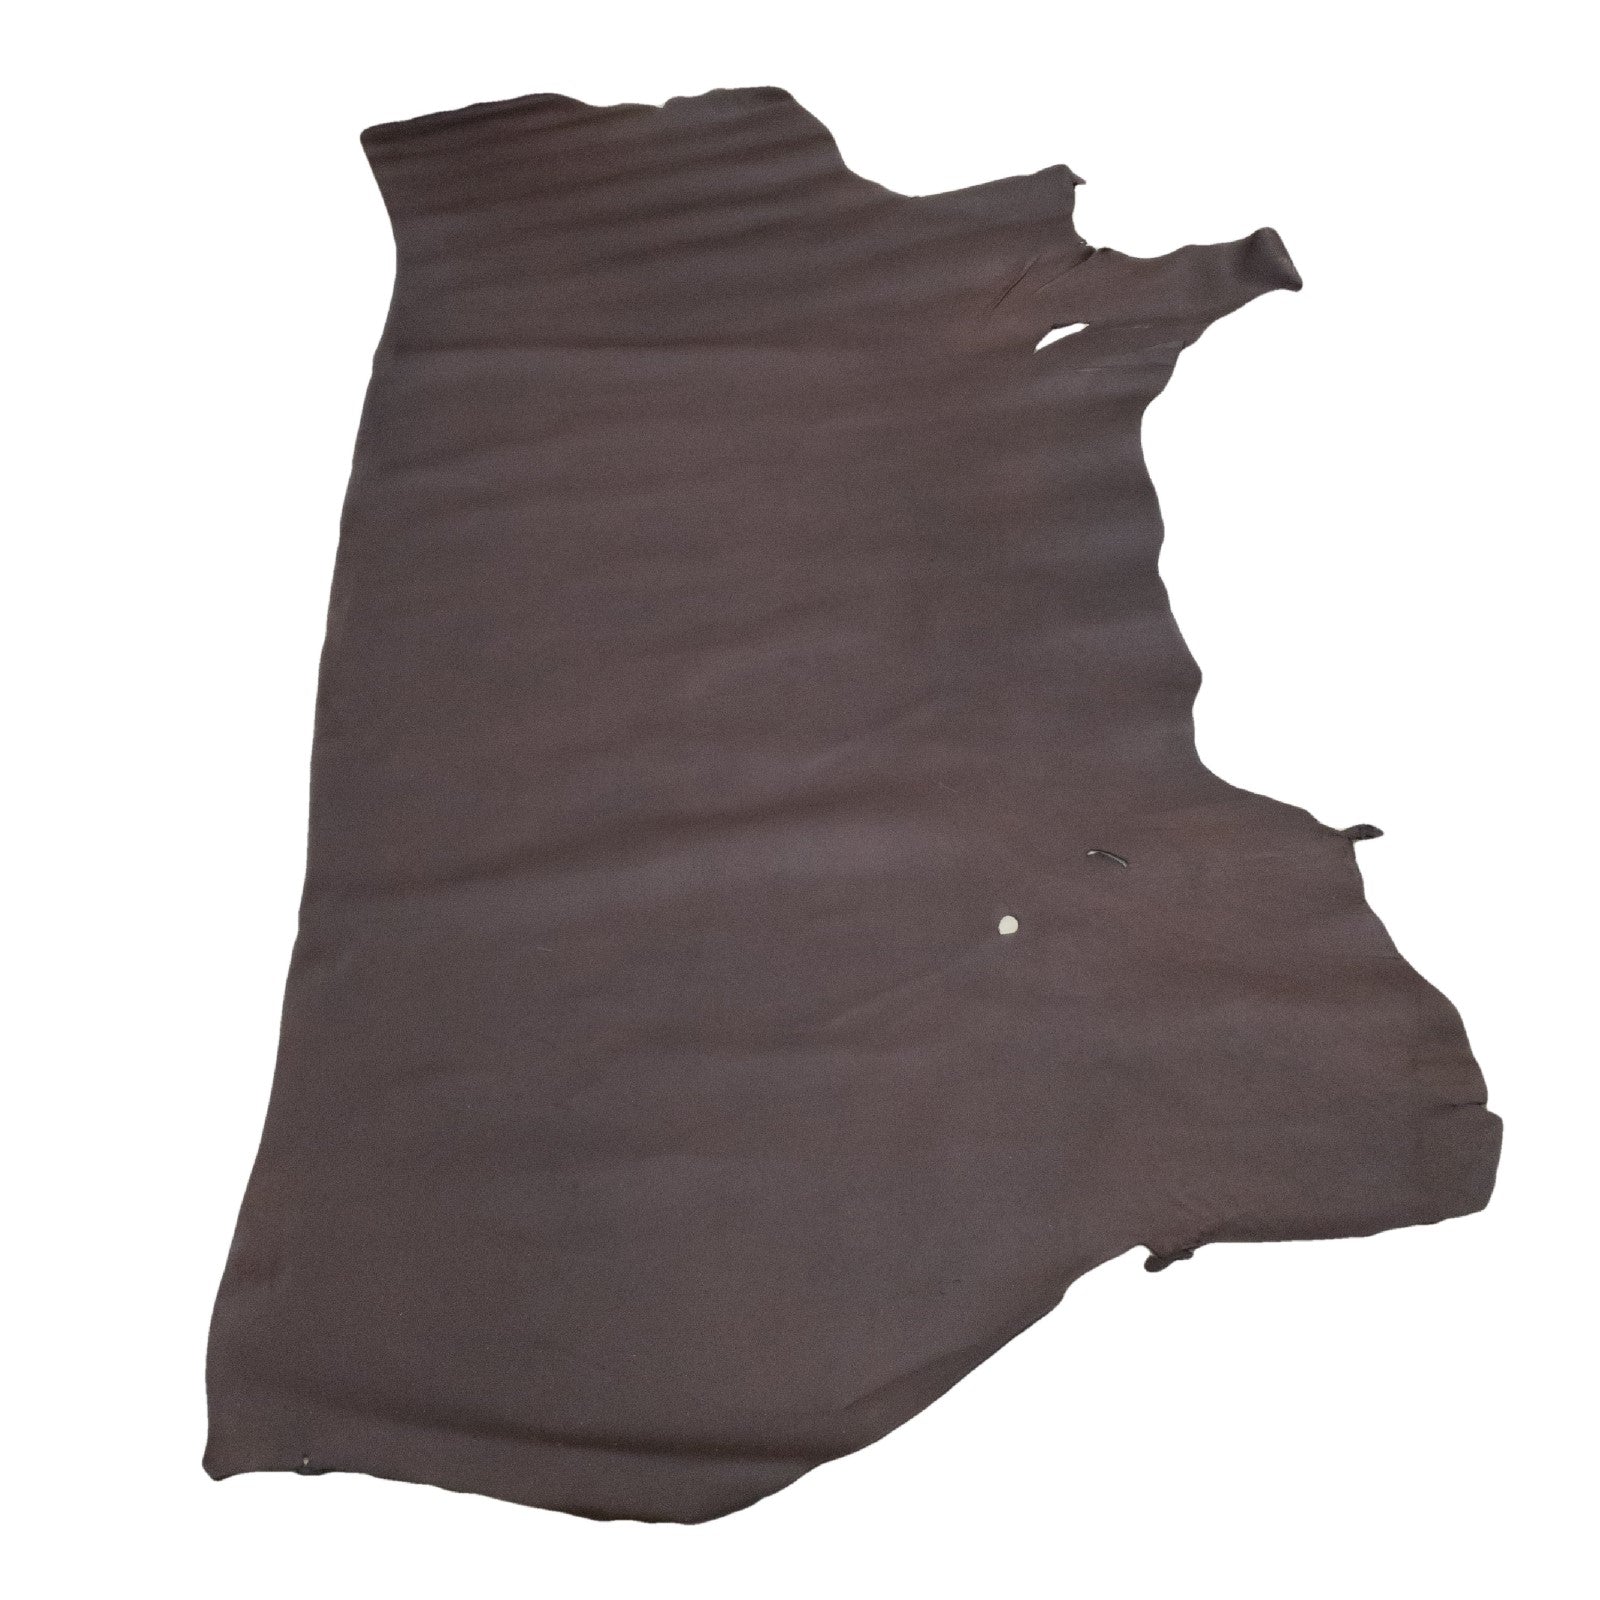 Hickory Brown, 4-5 oz, 18-20 Sq Ft, Oil Tan Sides, 18-20 sq. ft | The Leather Guy